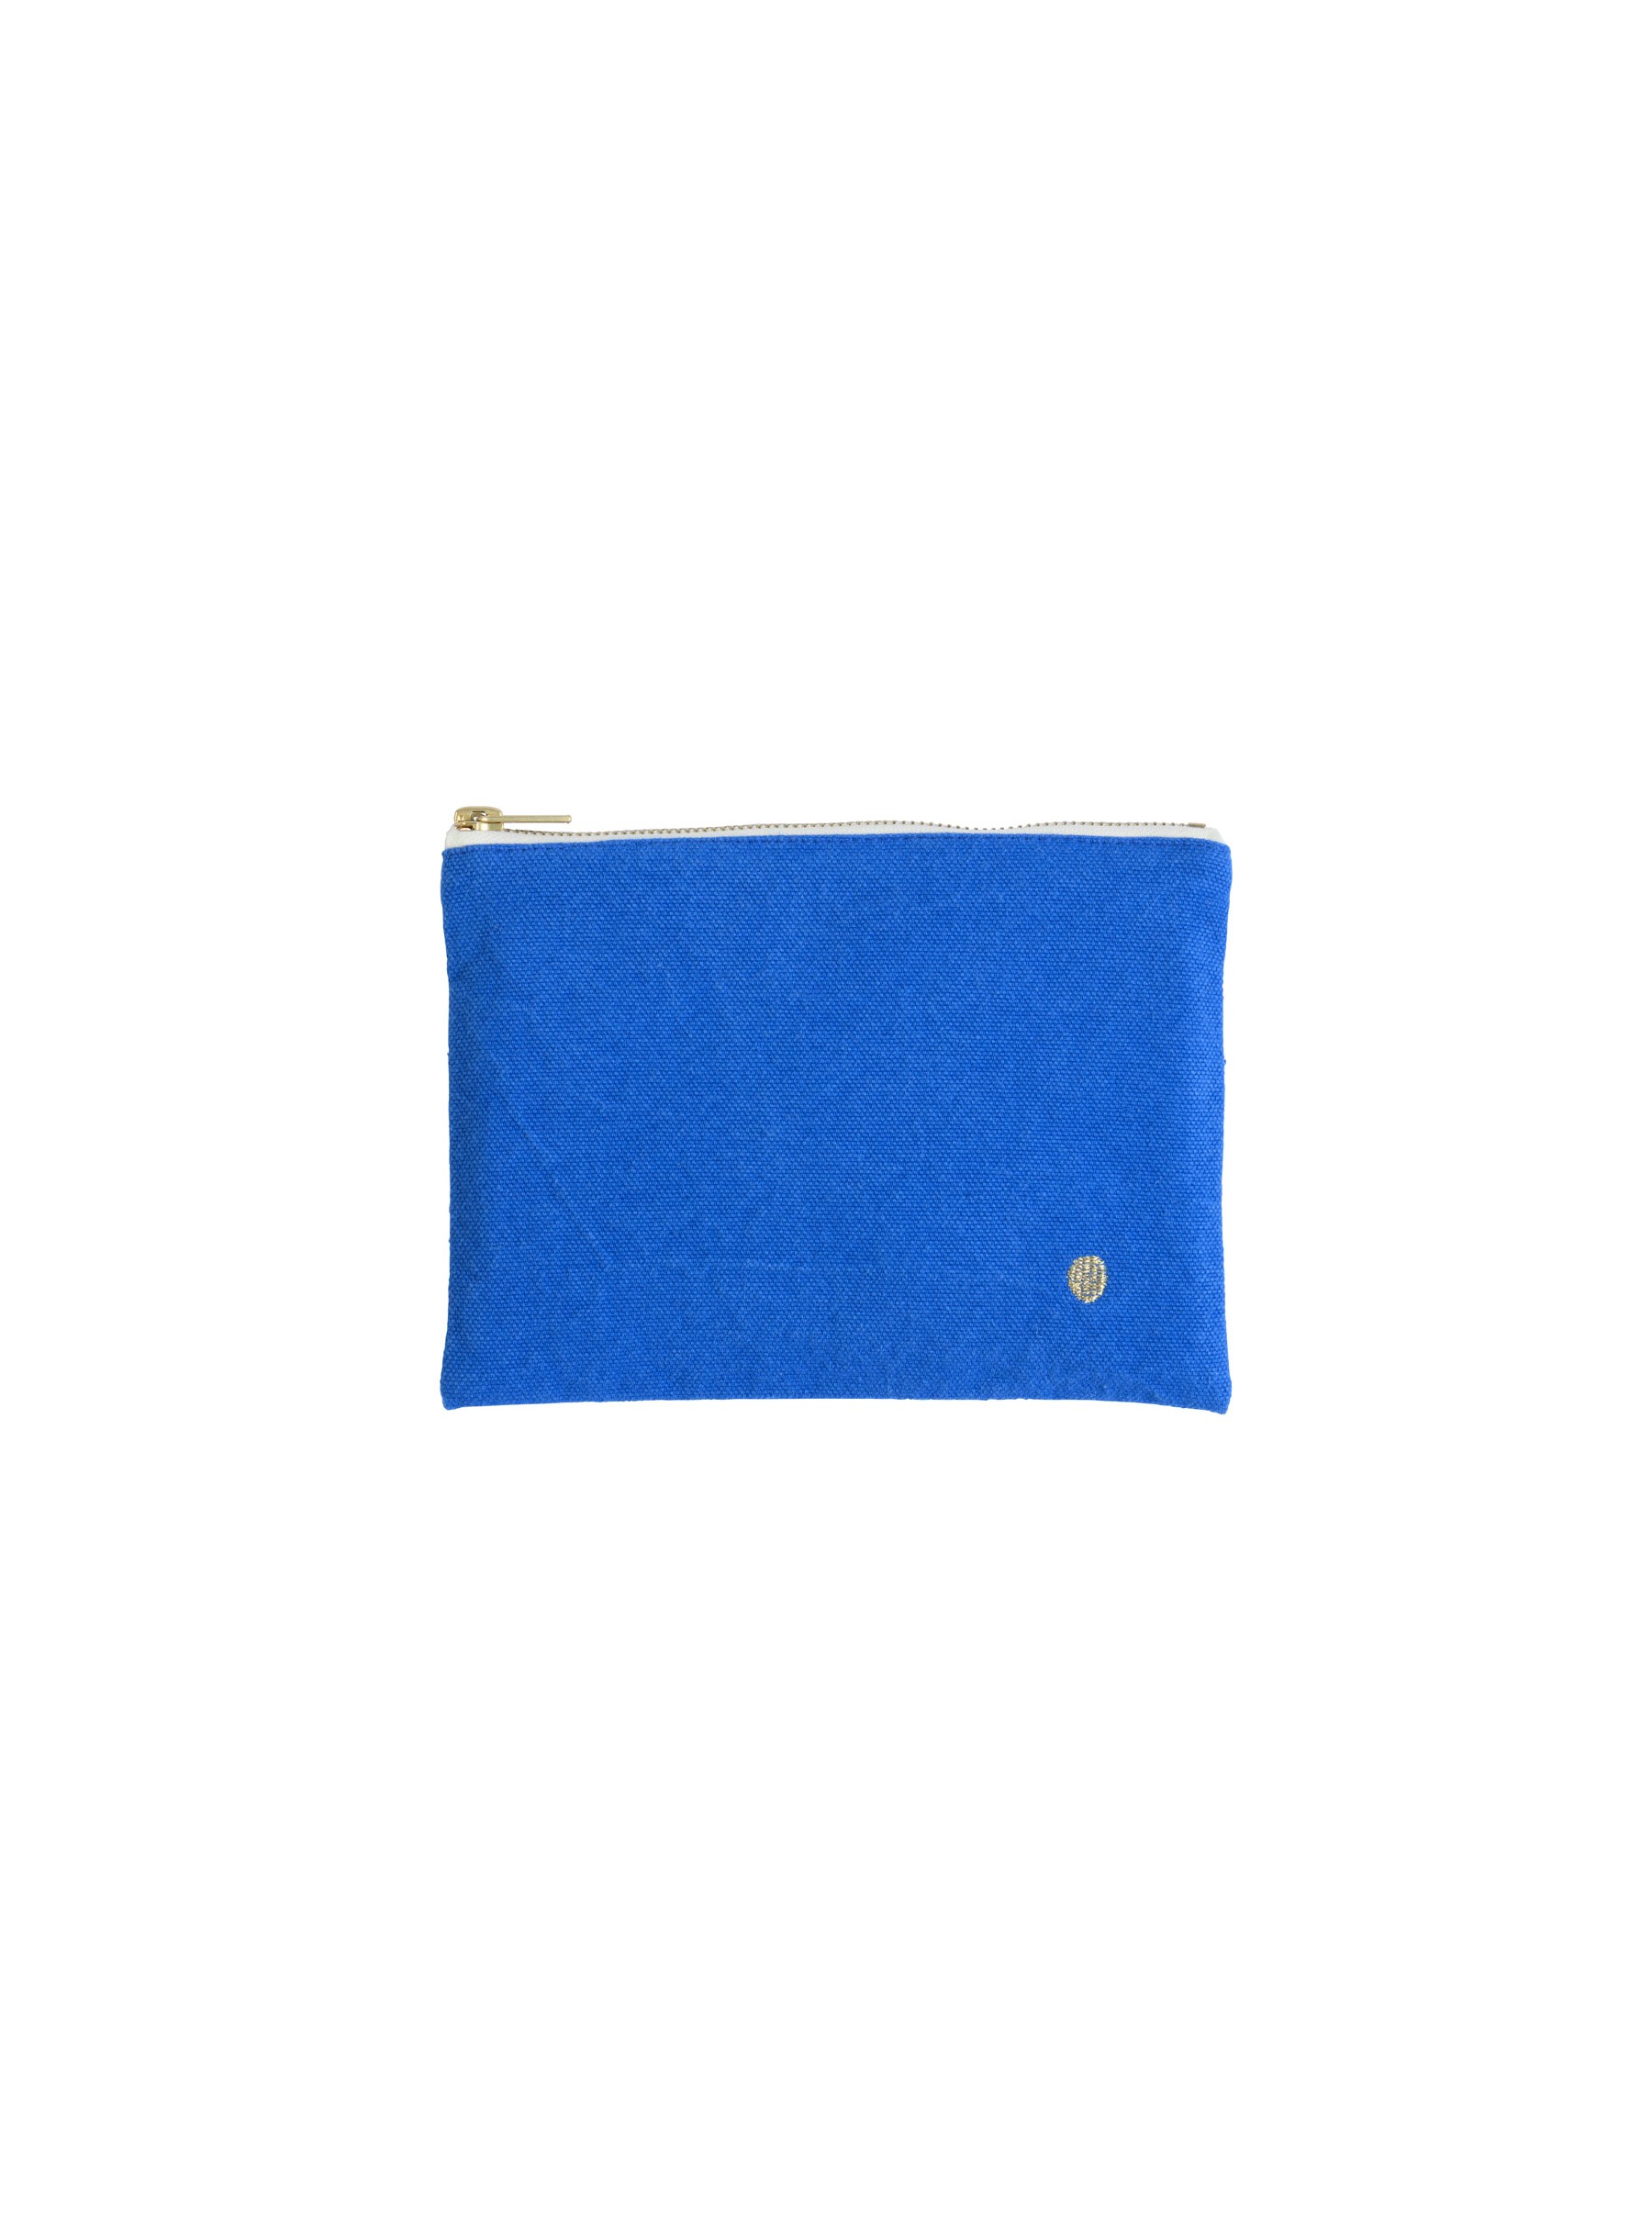 POUCH IONA M